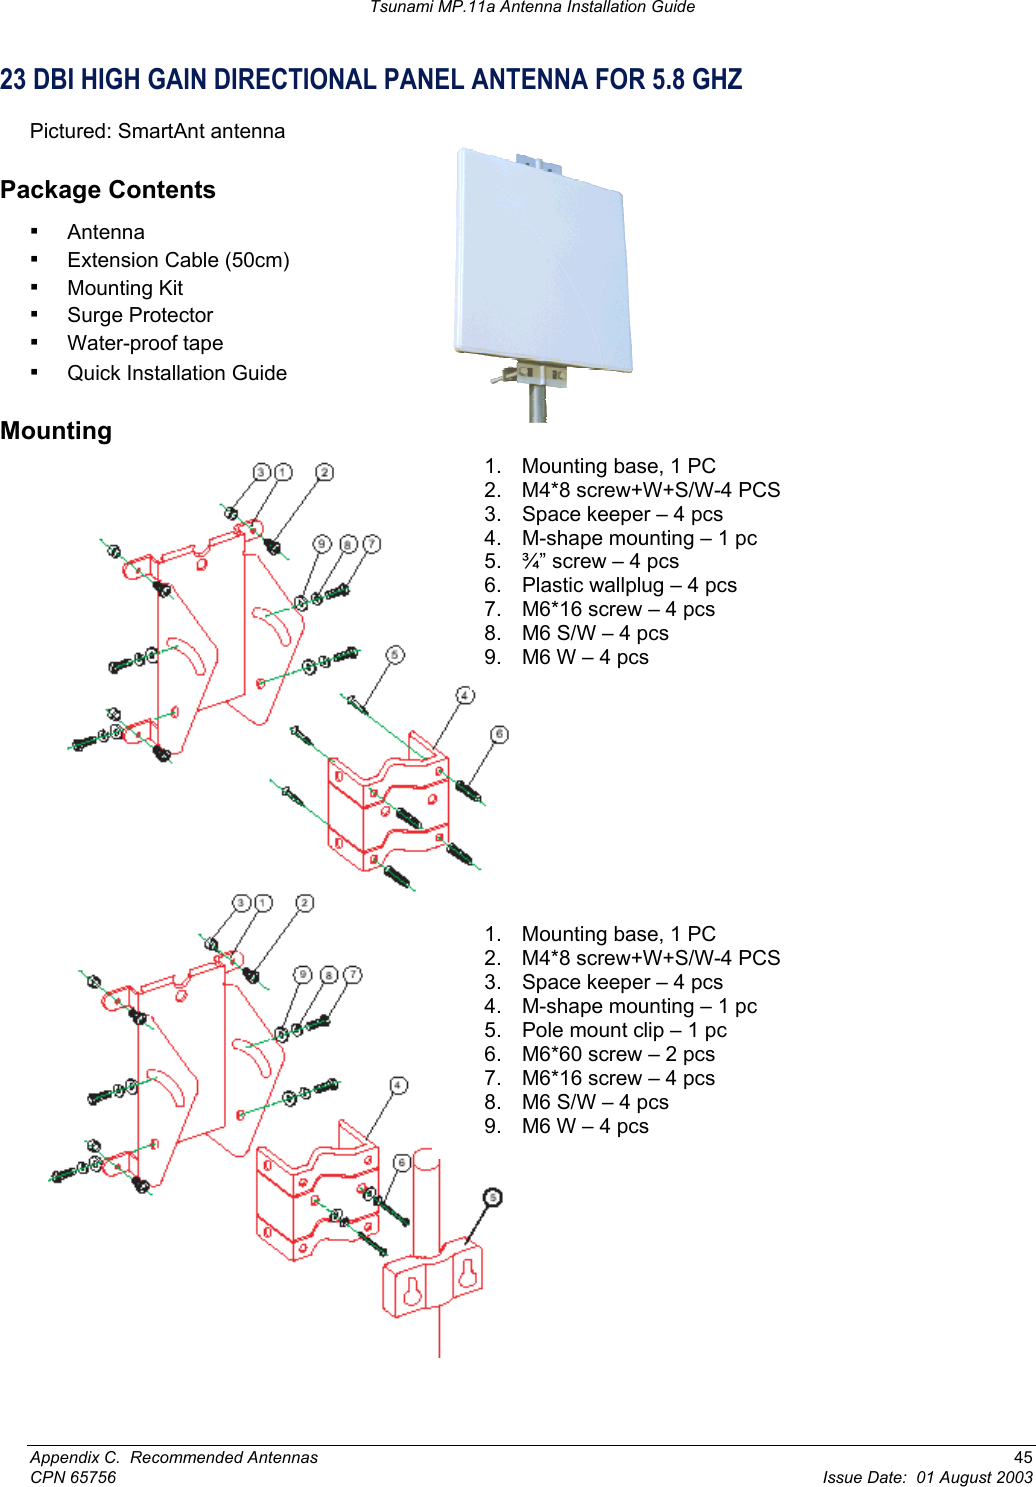 Tsunami MP.11a Antenna Installation Guide 23 DBI HIGH GAIN DIRECTIONAL PANEL ANTENNA FOR 5.8 GHZ Pictured: SmartAnt antenna Package Contents ▪ Antenna  ▪ Extension Cable (50cm)  ▪ Mounting Kit  ▪ Surge Protector  ▪ Water-proof tape  ▪ Quick Installation Guide Mounting  1.  Mounting base, 1 PC 2.  M4*8 screw+W+S/W-4 PCS 3.  Space keeper – 4 pcs 4.  M-shape mounting – 1 pc 5.  ¾” screw – 4 pcs 6.  Plastic wallplug – 4 pcs 7.  M6*16 screw – 4 pcs 8.  M6 S/W – 4 pcs 9.  M6 W – 4 pcs 1.  Mounting base, 1 PC 2.  M4*8 screw+W+S/W-4 PCS 3.  Space keeper – 4 pcs 4.  M-shape mounting – 1 pc 5.  Pole mount clip – 1 pc 6.  M6*60 screw – 2 pcs 7.  M6*16 screw – 4 pcs 8.  M6 S/W – 4 pcs 9.  M6 W – 4 pcs Appendix C.  Recommended Antennas  45 CPN 65756  Issue Date:  01 August 2003 